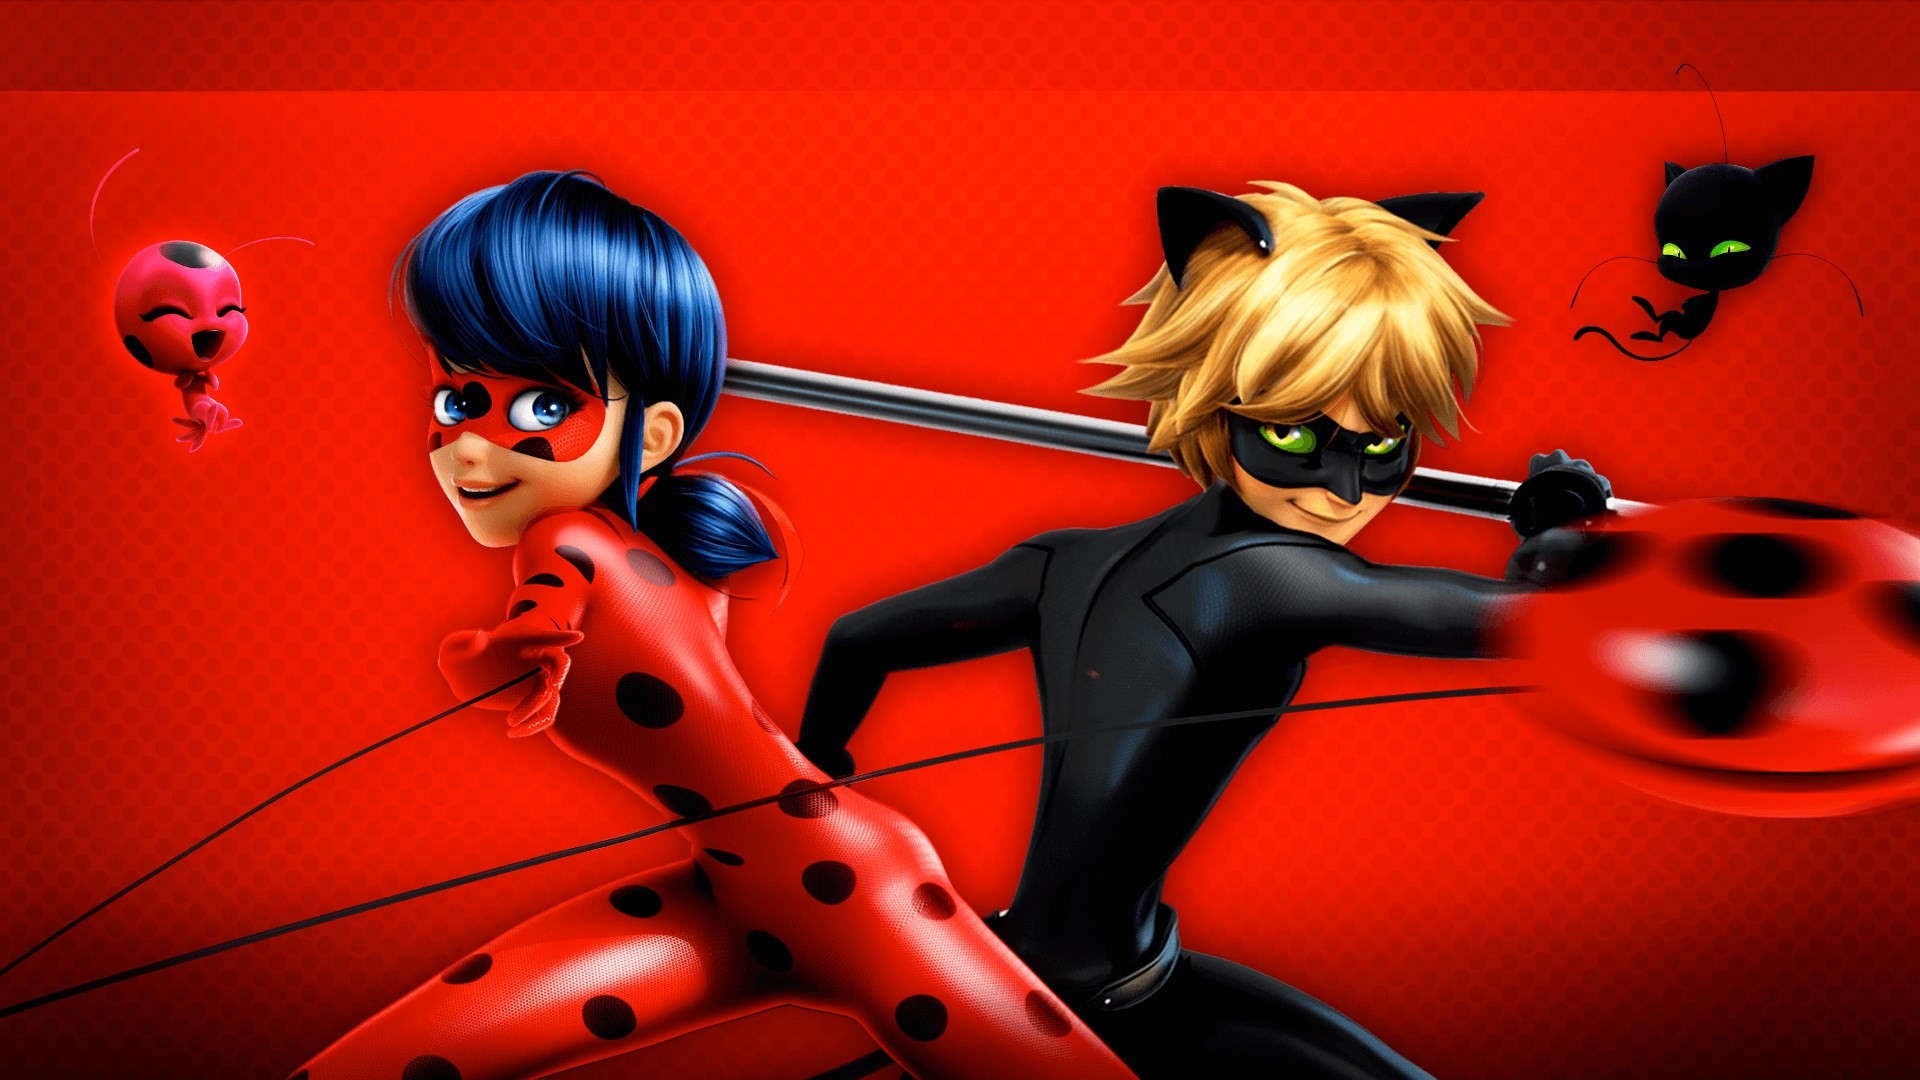 1920x1080 Backgrounds High Resolution: miraculous tales of ladybug and cat noir  picture, 287 kB - Ditte Fairy